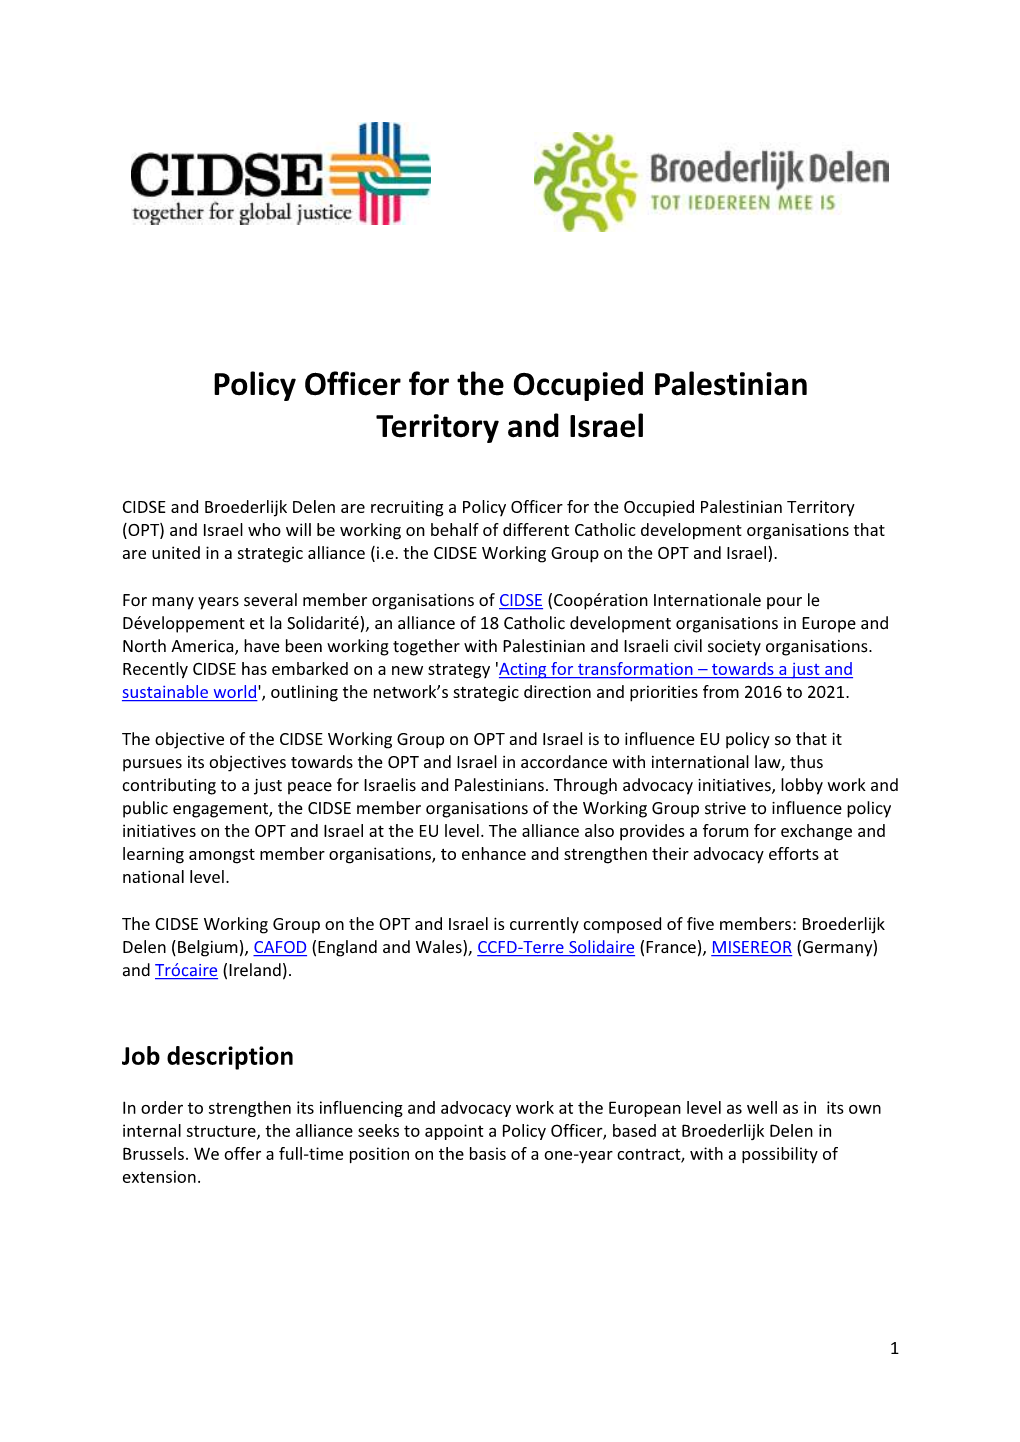 Policy Officer for the Occupied Palestinian Territory and Israel